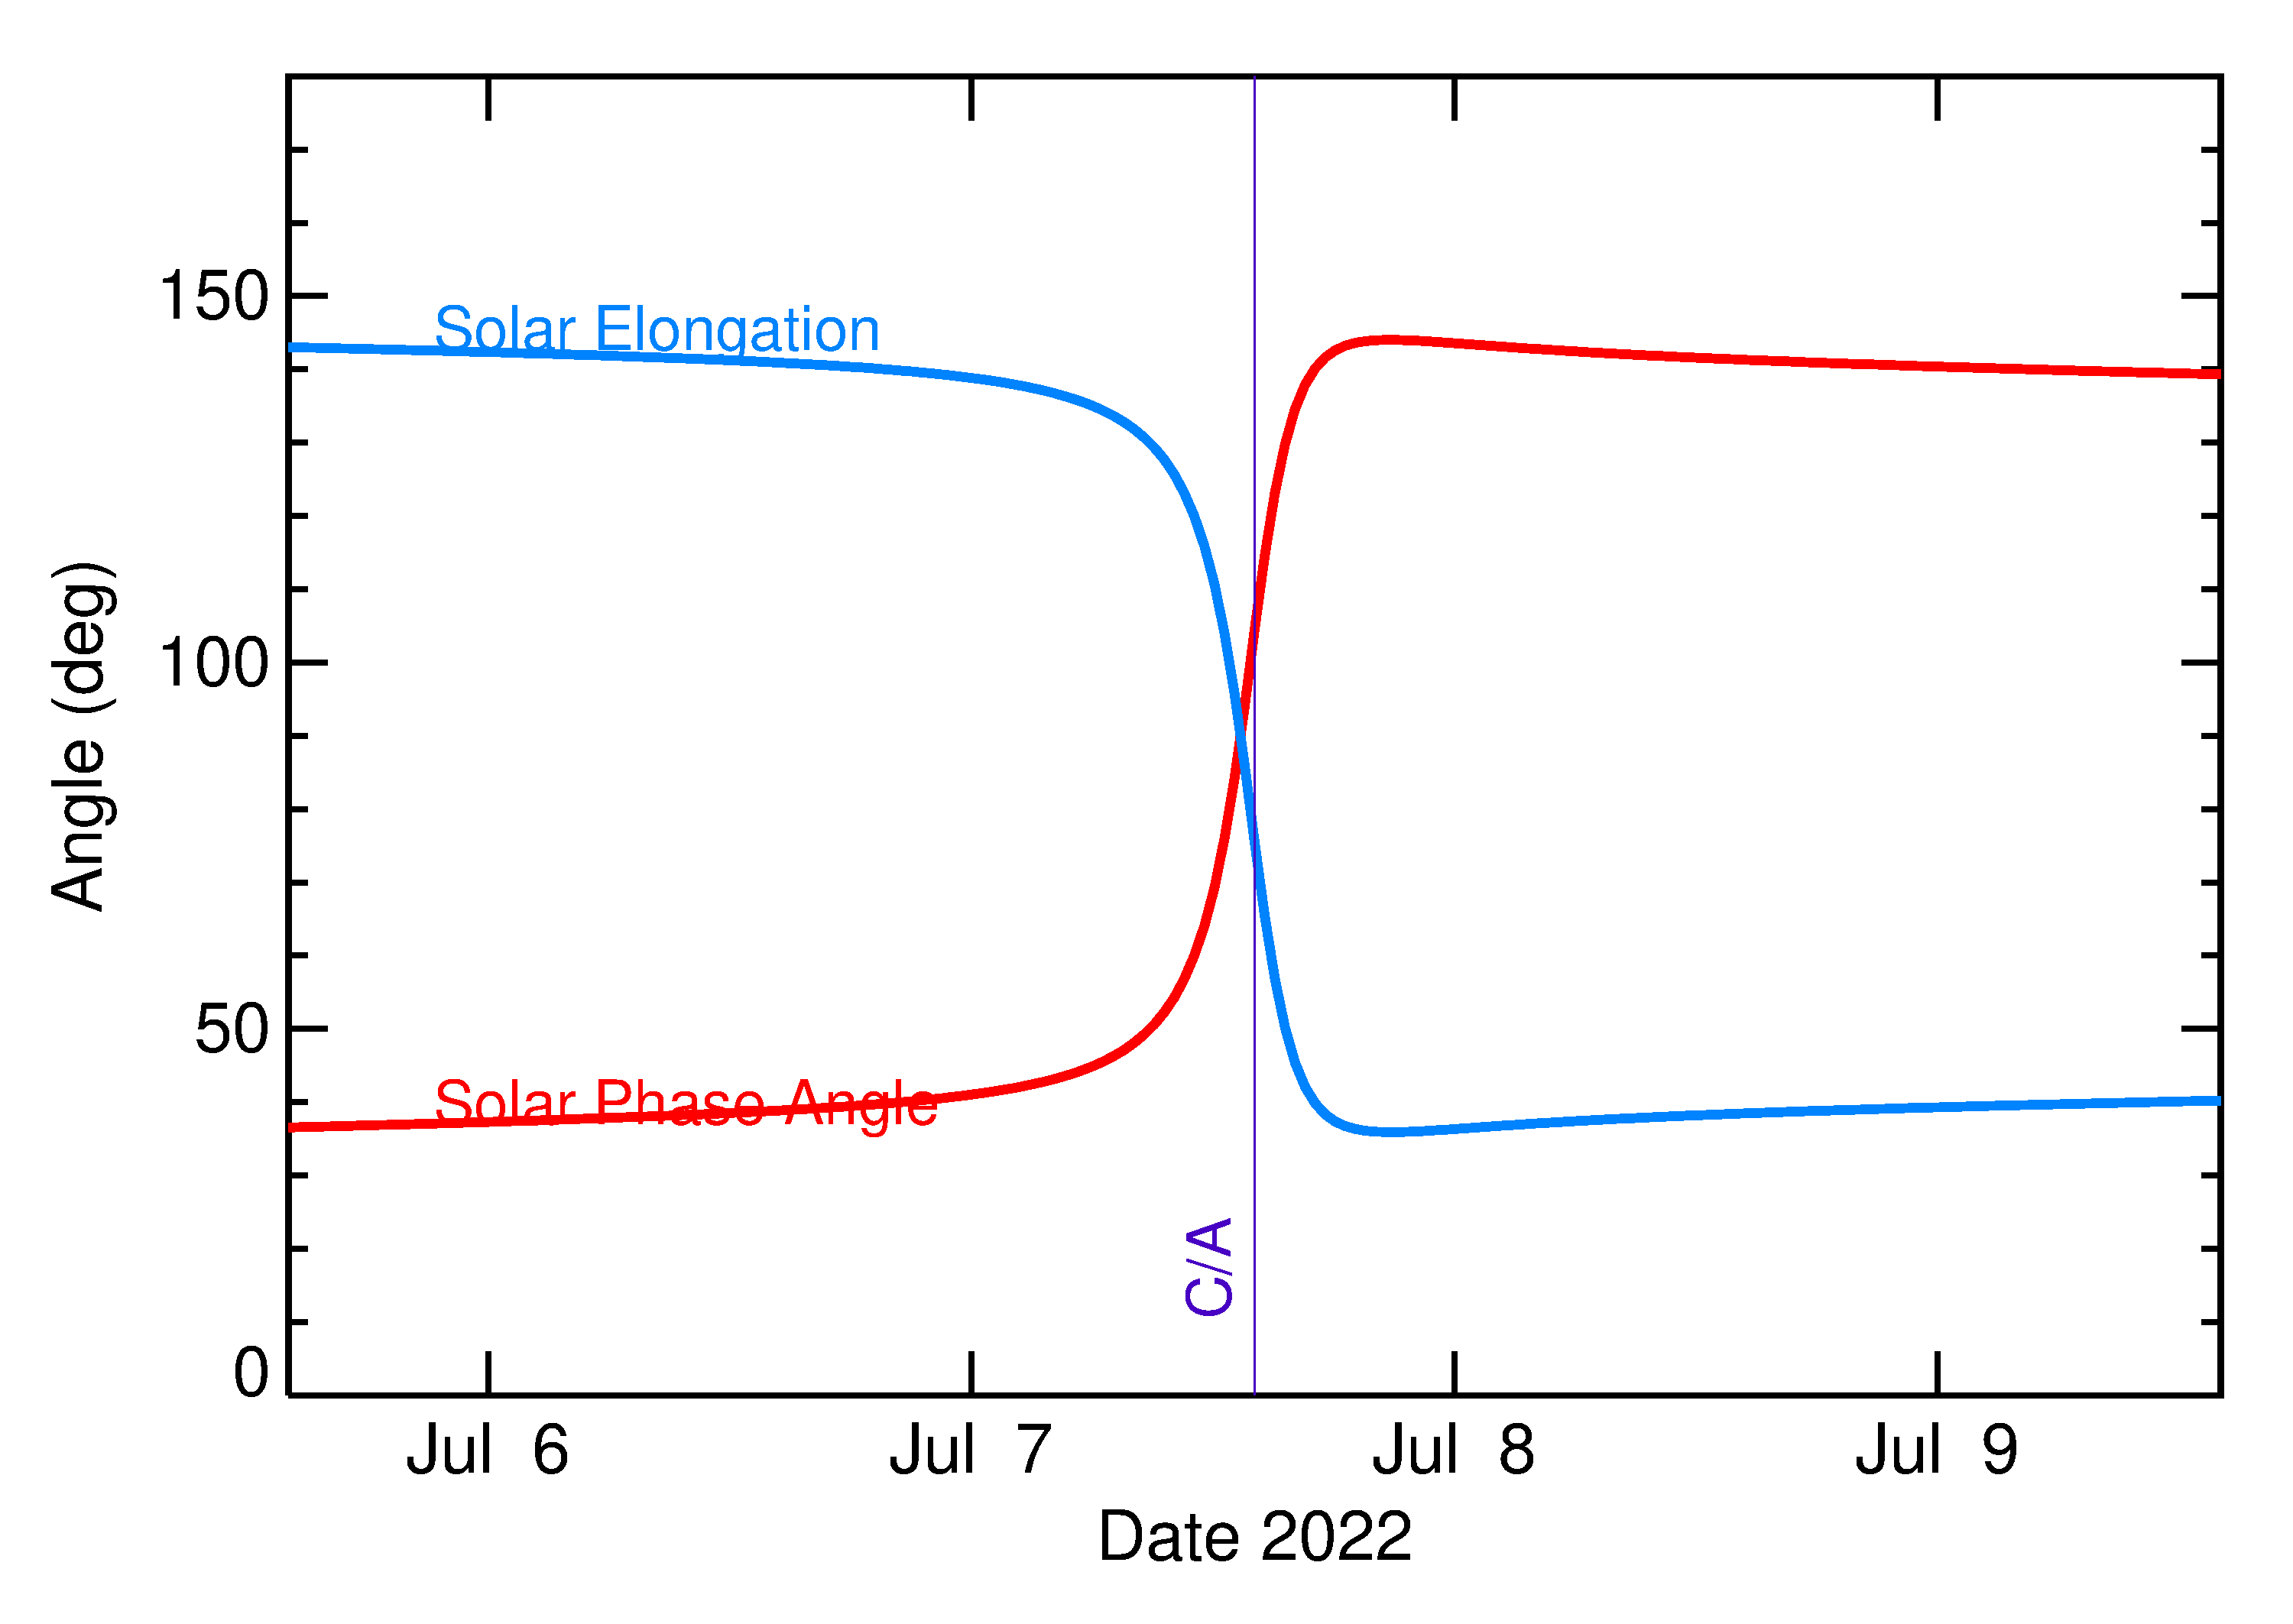 Solar Elongation and Solar Phase Angle of 2022 NF in the days around closest approach